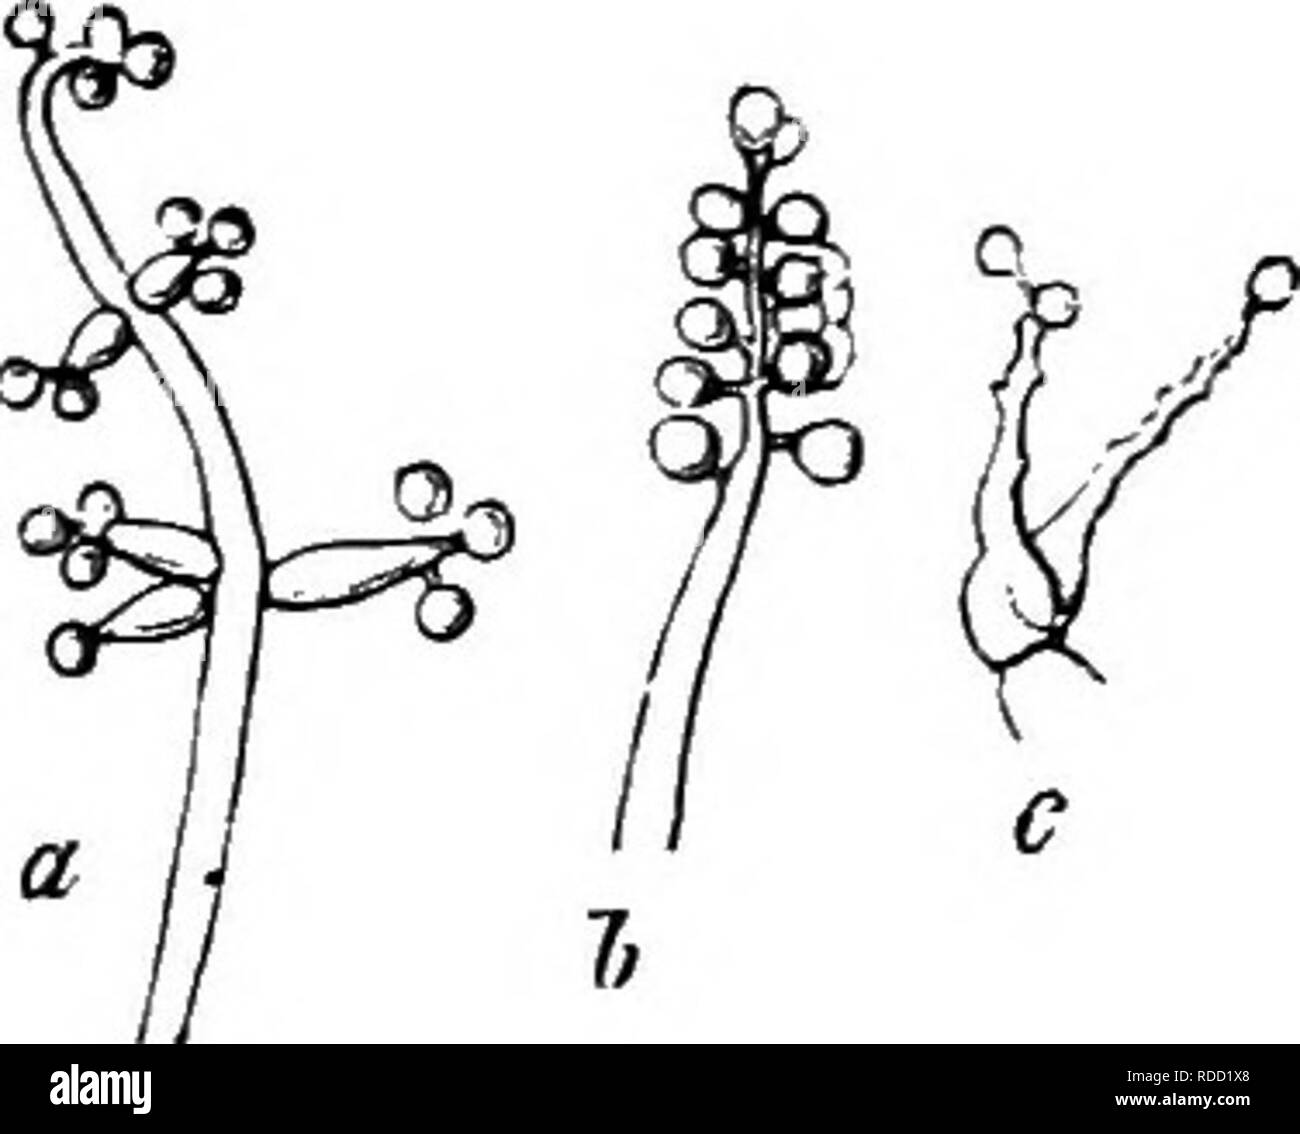 . Comparative morphology and biology of the fungi, mycetozoa and bacteria . Plant morphology; Fungi; Myxomycetes; Bacteriology. FIG. 31. Dadylium macrosporitTn, Vt. Extremiries of spori- ferous hyphae. a in a dry state with a head of spores above, b in water with the primordia of the youngest spores s at the extremities of the branches, the small unevennesses beneath beinif the points of attachment of the older spores which have become detached in the water. Magn. 300 times.. Fig. 32. Botrytis Bassii, Bals. a end of a young sporiferous hypha; short lateral branchlets have successively abjointe Stock Photo